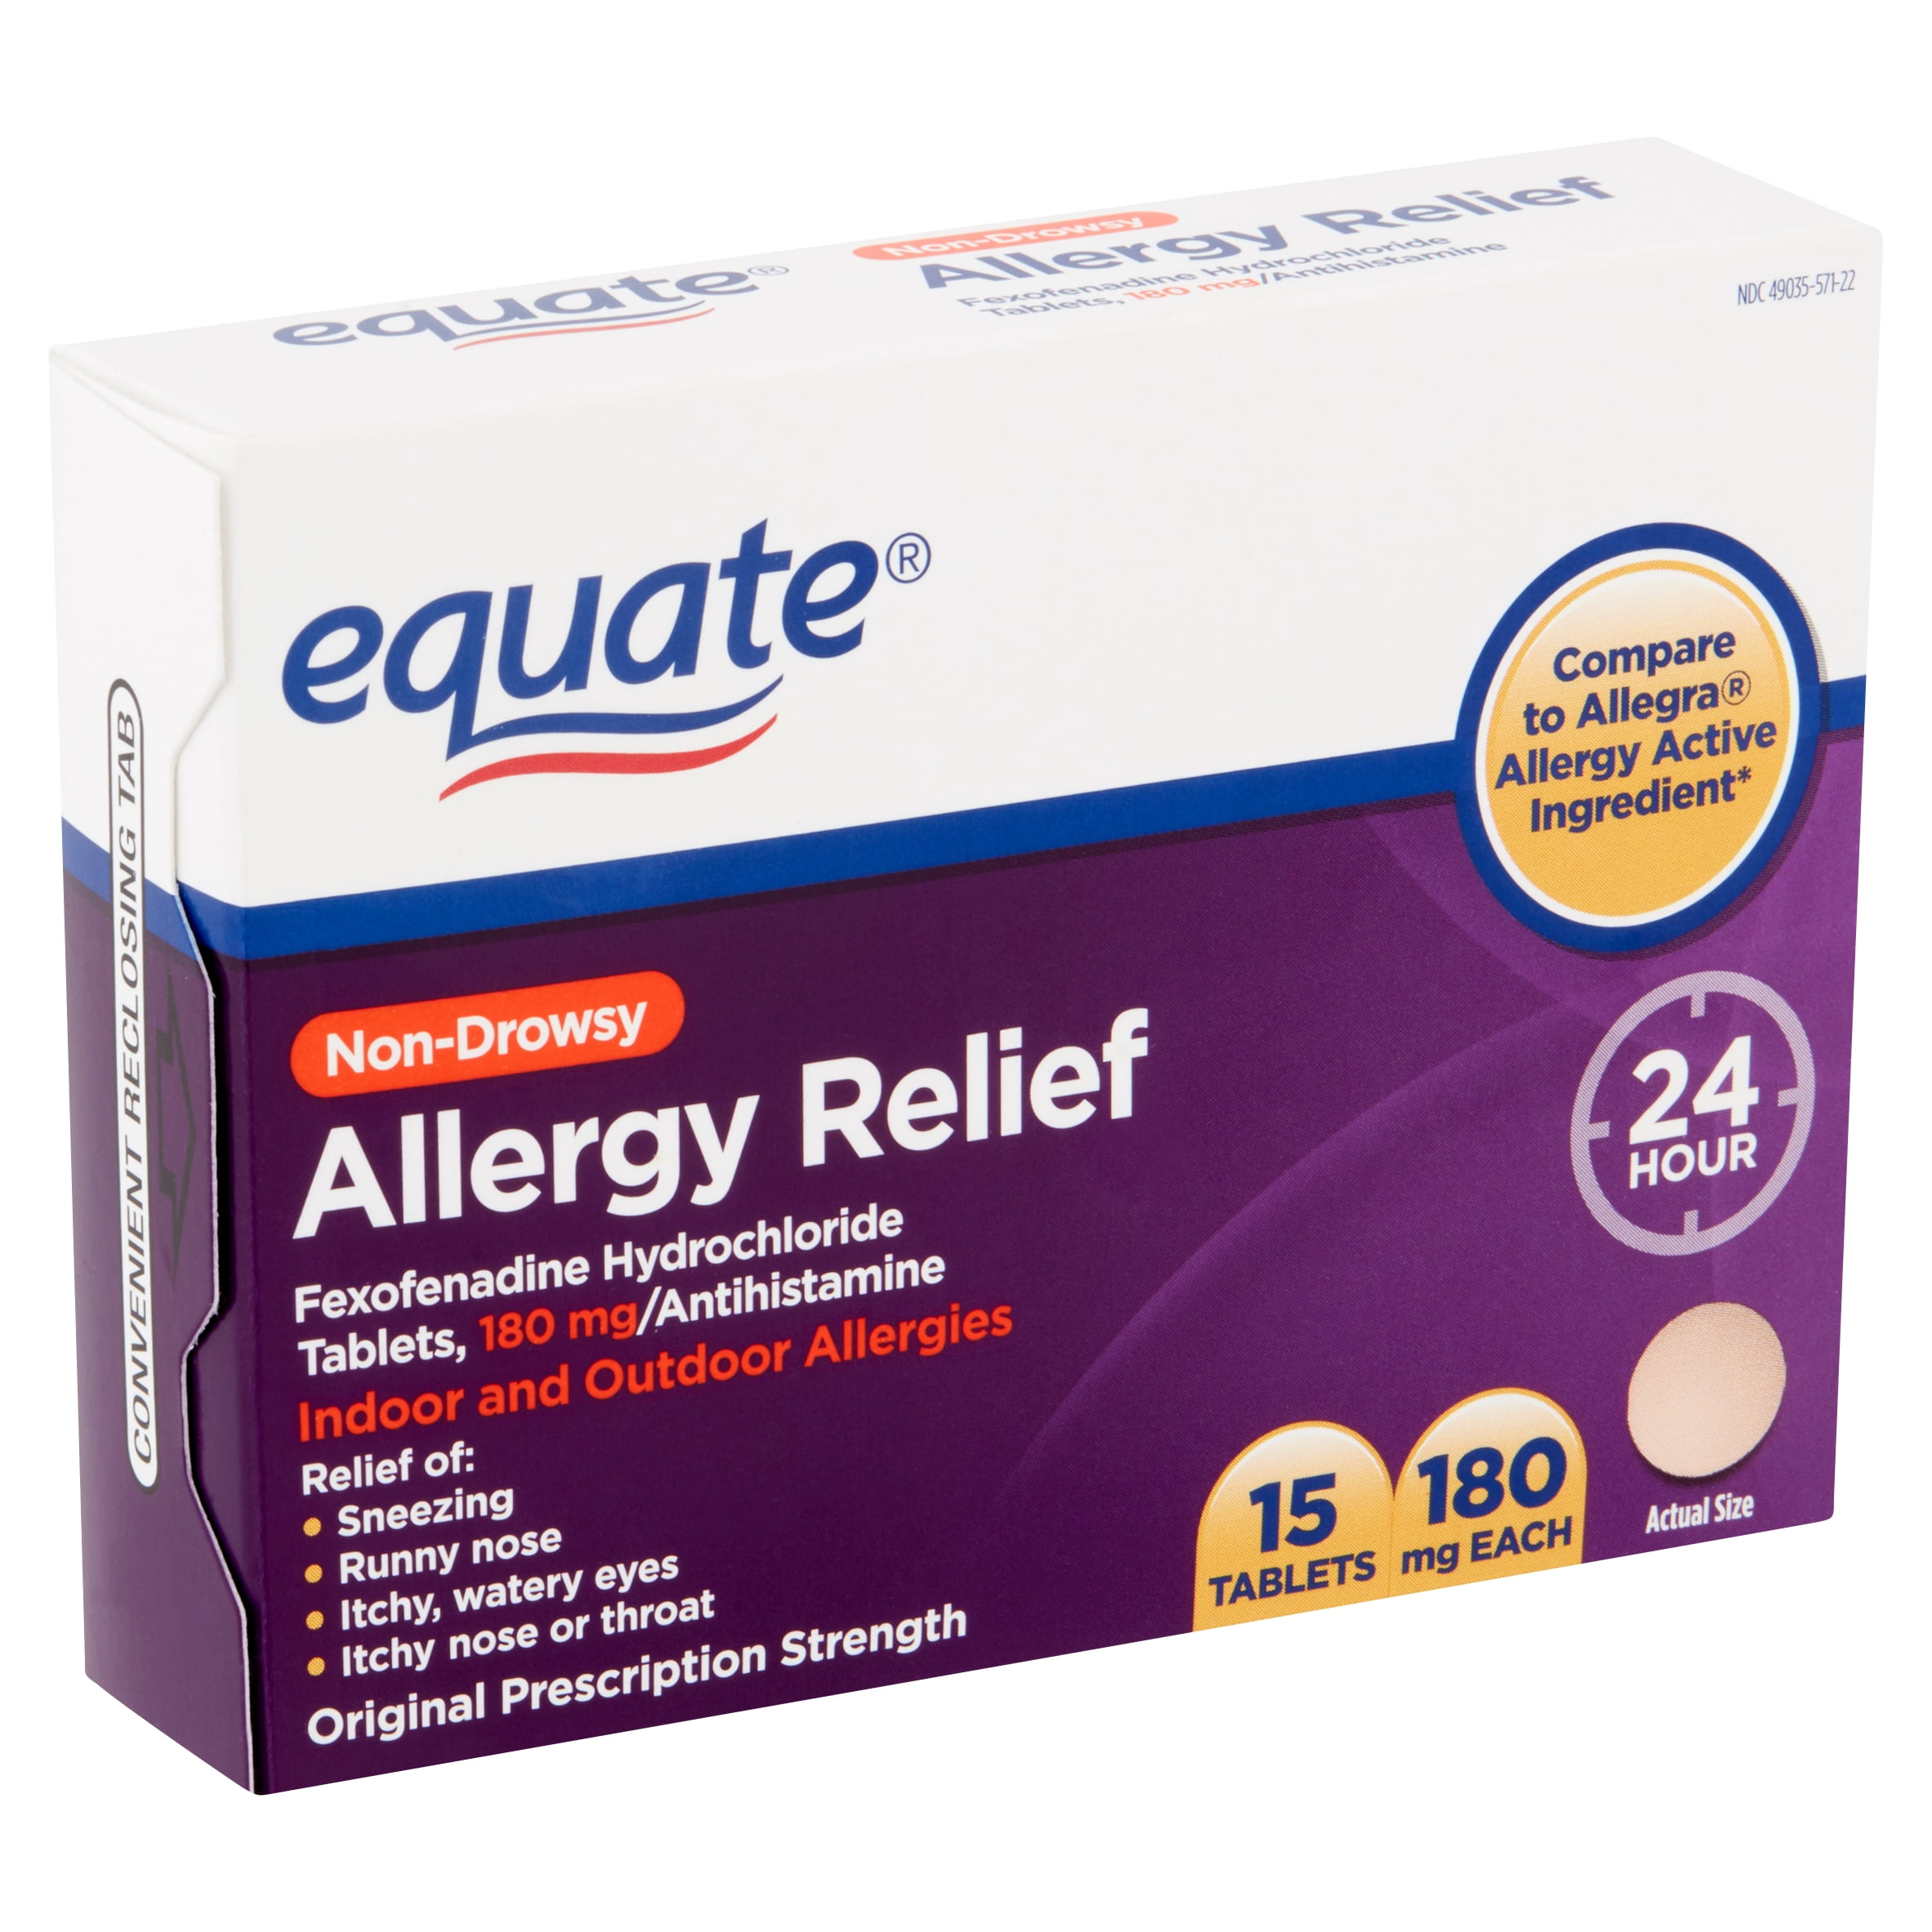 Equate Non-Drowsy Allergy Relief Tablets, 180 mg, 15 count - Walmart.com.